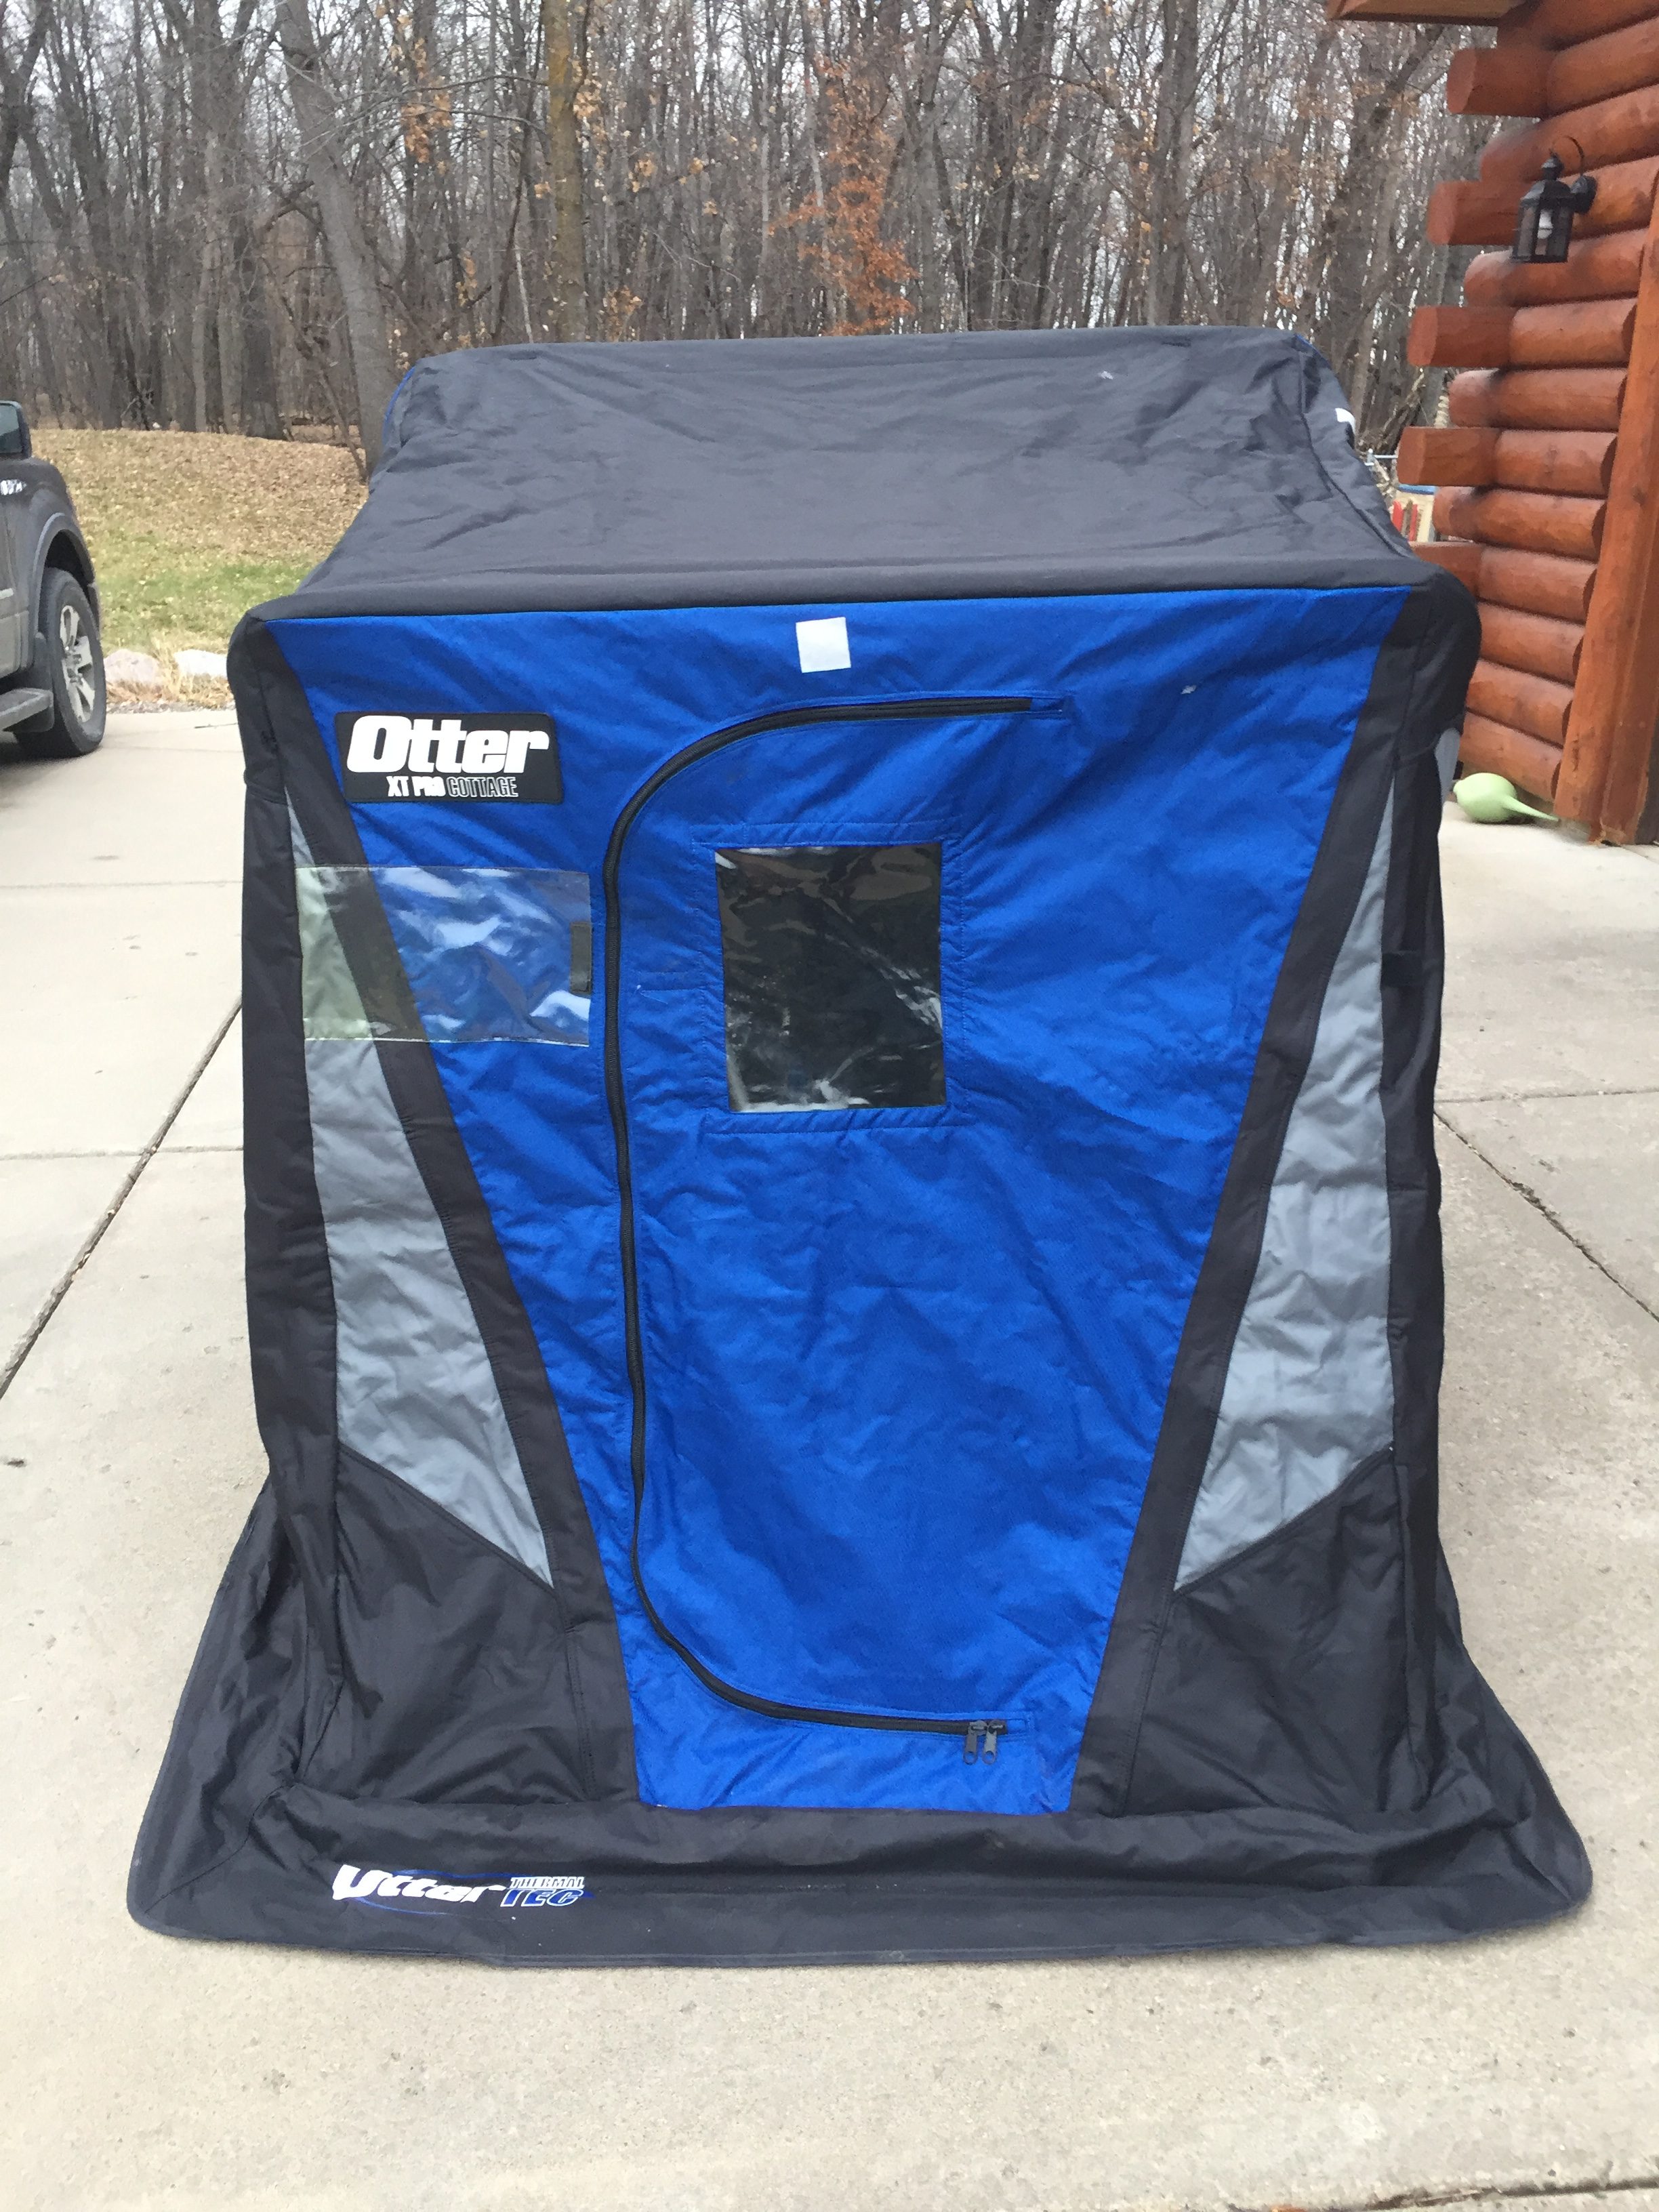 Otter XT Pro Cottage+Cover $525 - Classified Ads - Classified Ads